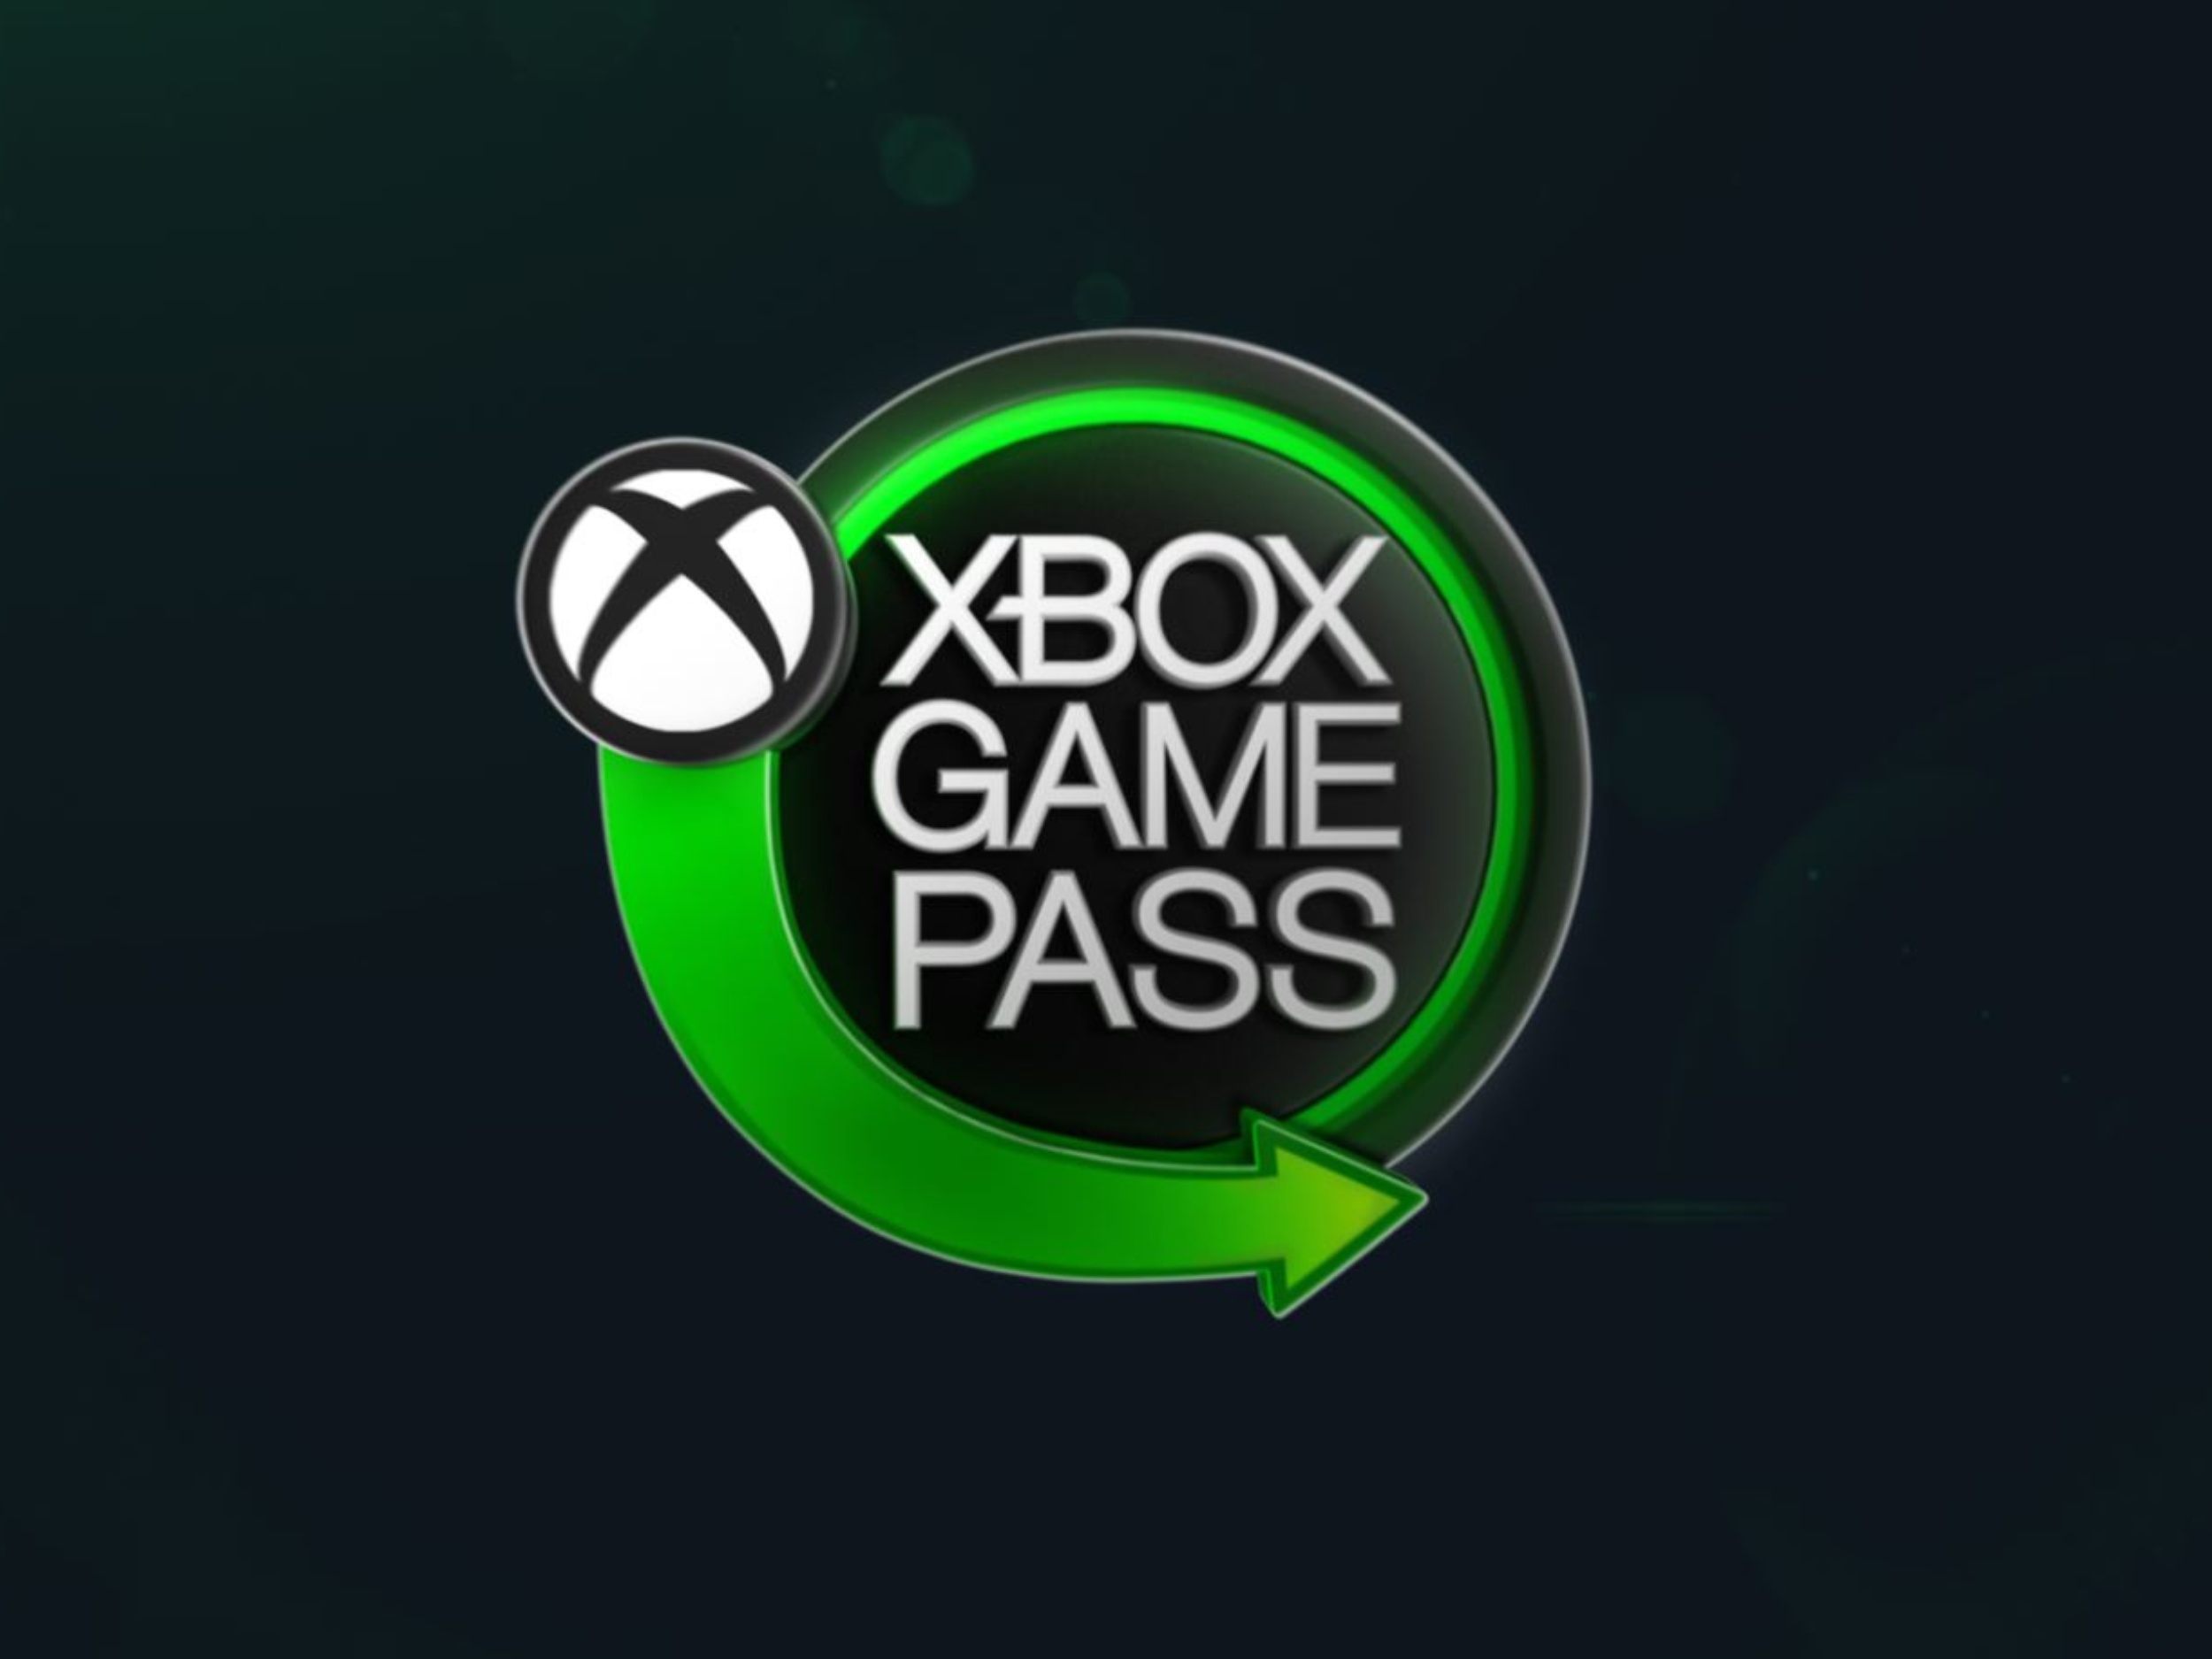 Xbox Game Pass could get two unannounced games this month, including a long-awaited AAA title